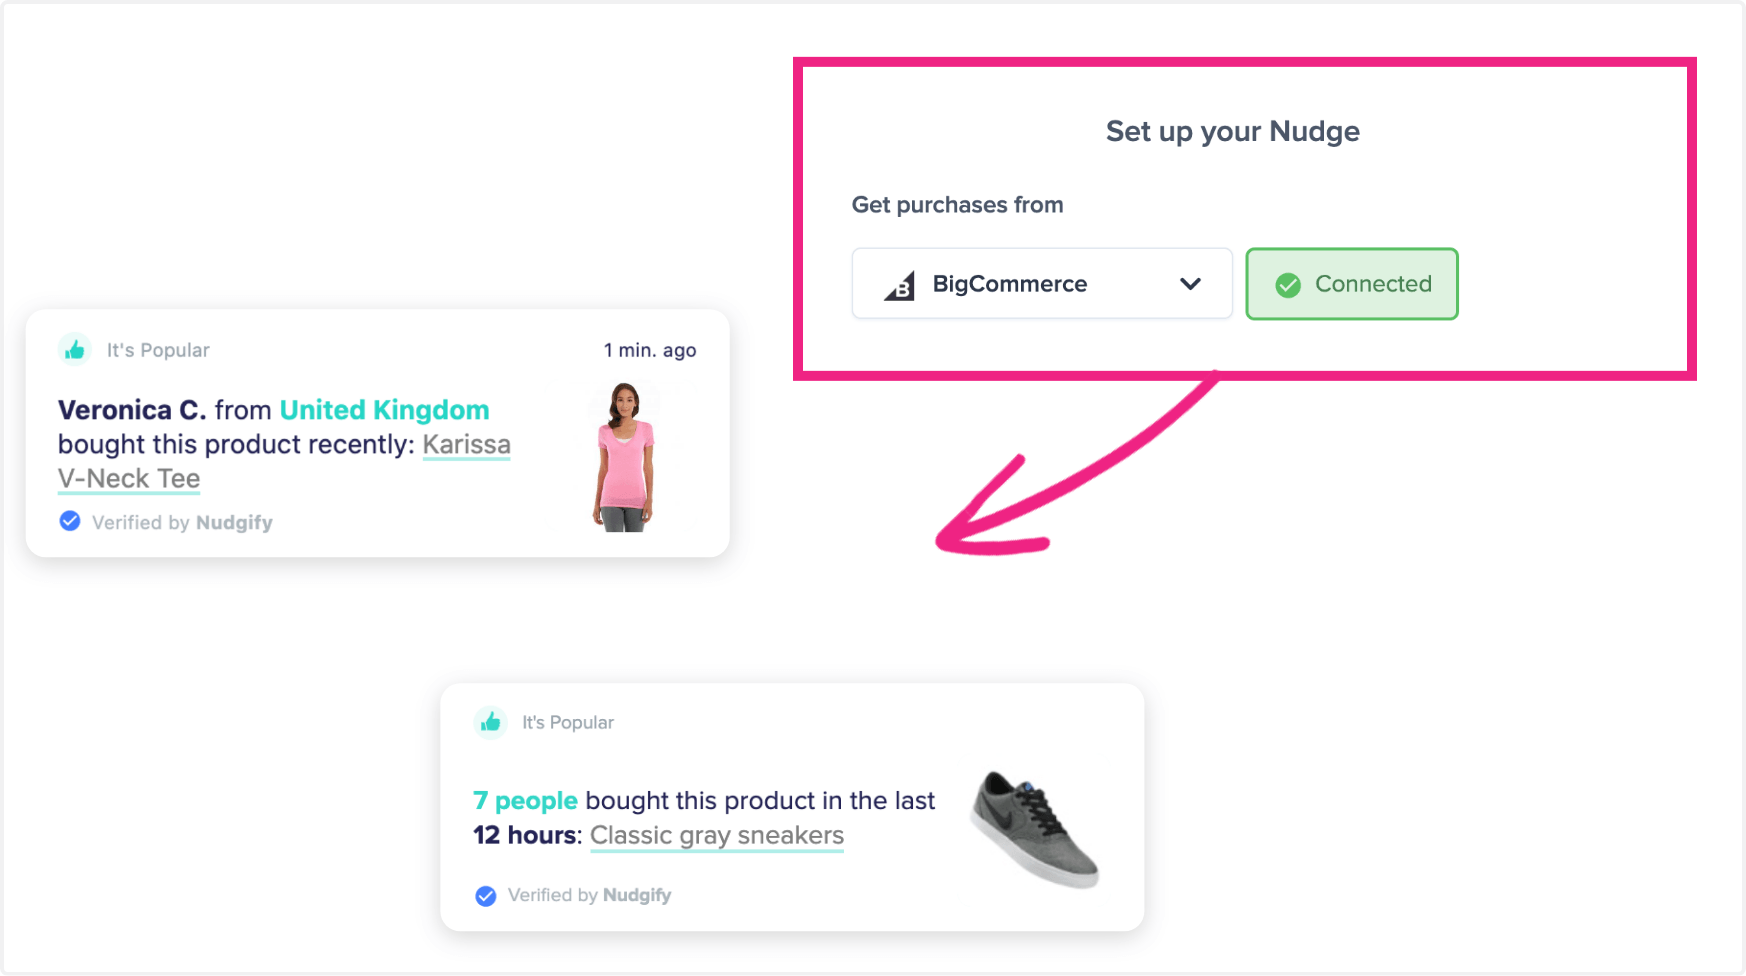 bigcommerce purchases